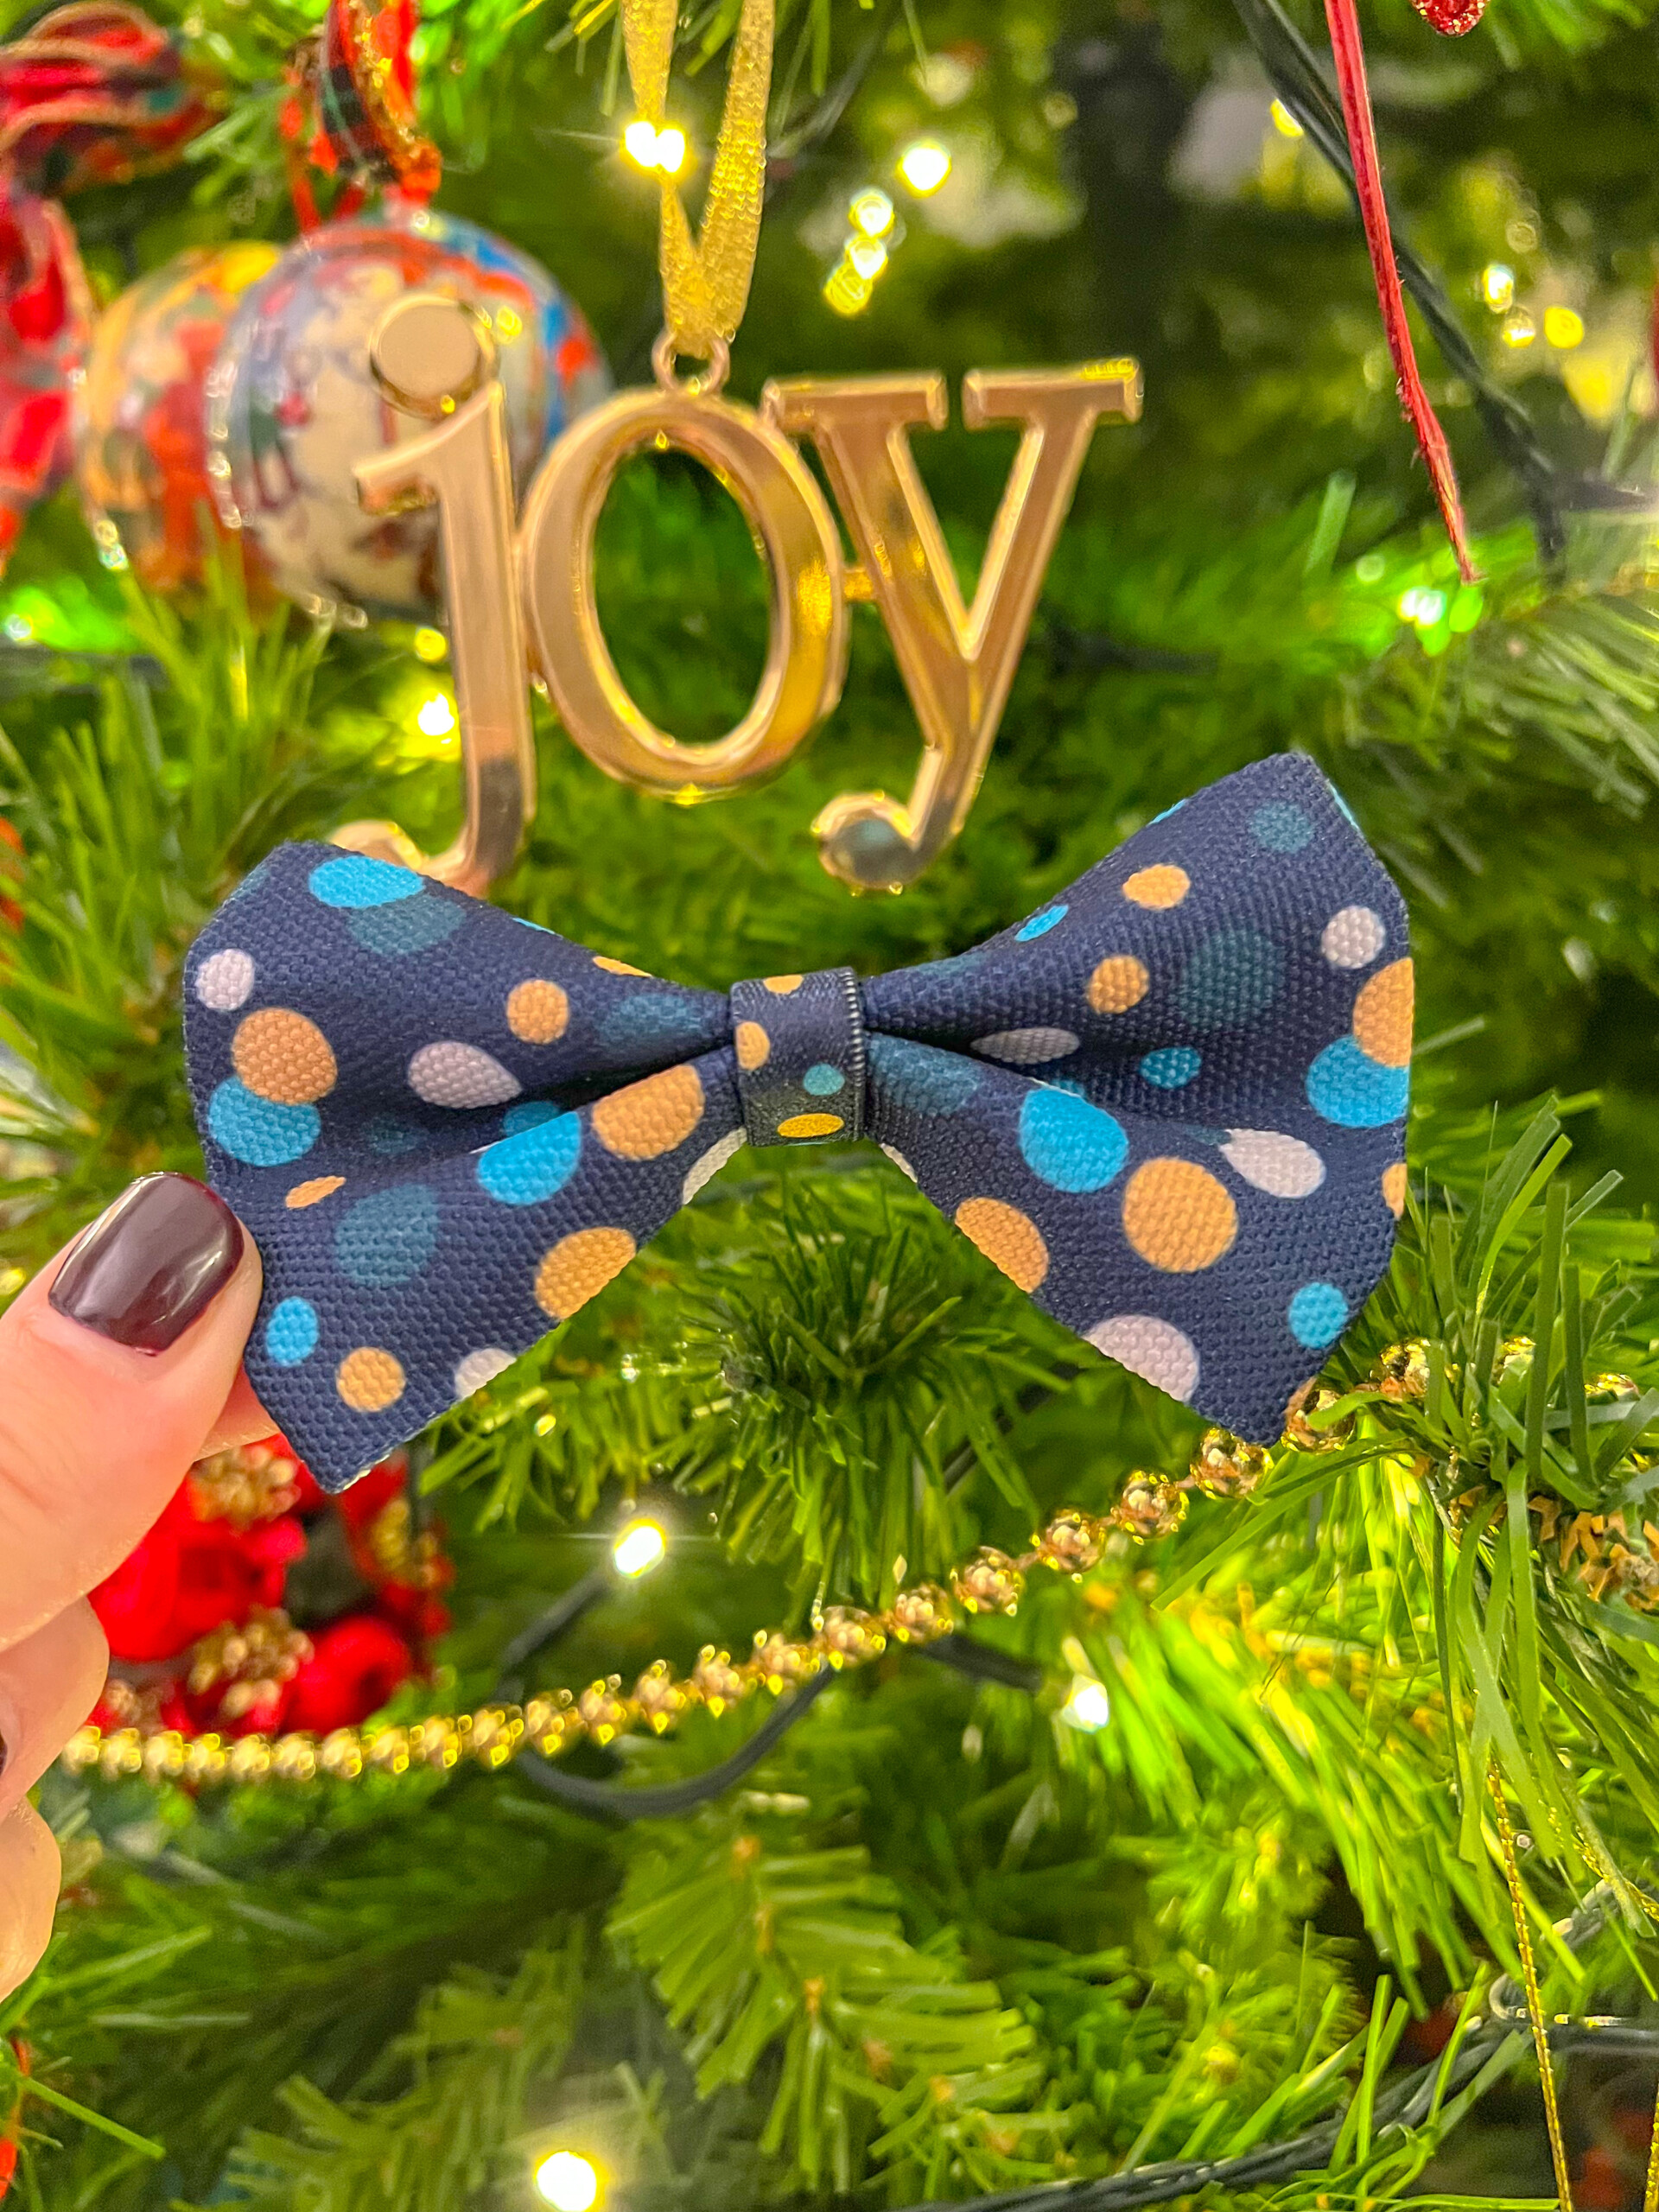 A winter dog bow tie, in a festive pattern with gold and blue spots on a dark blue background.